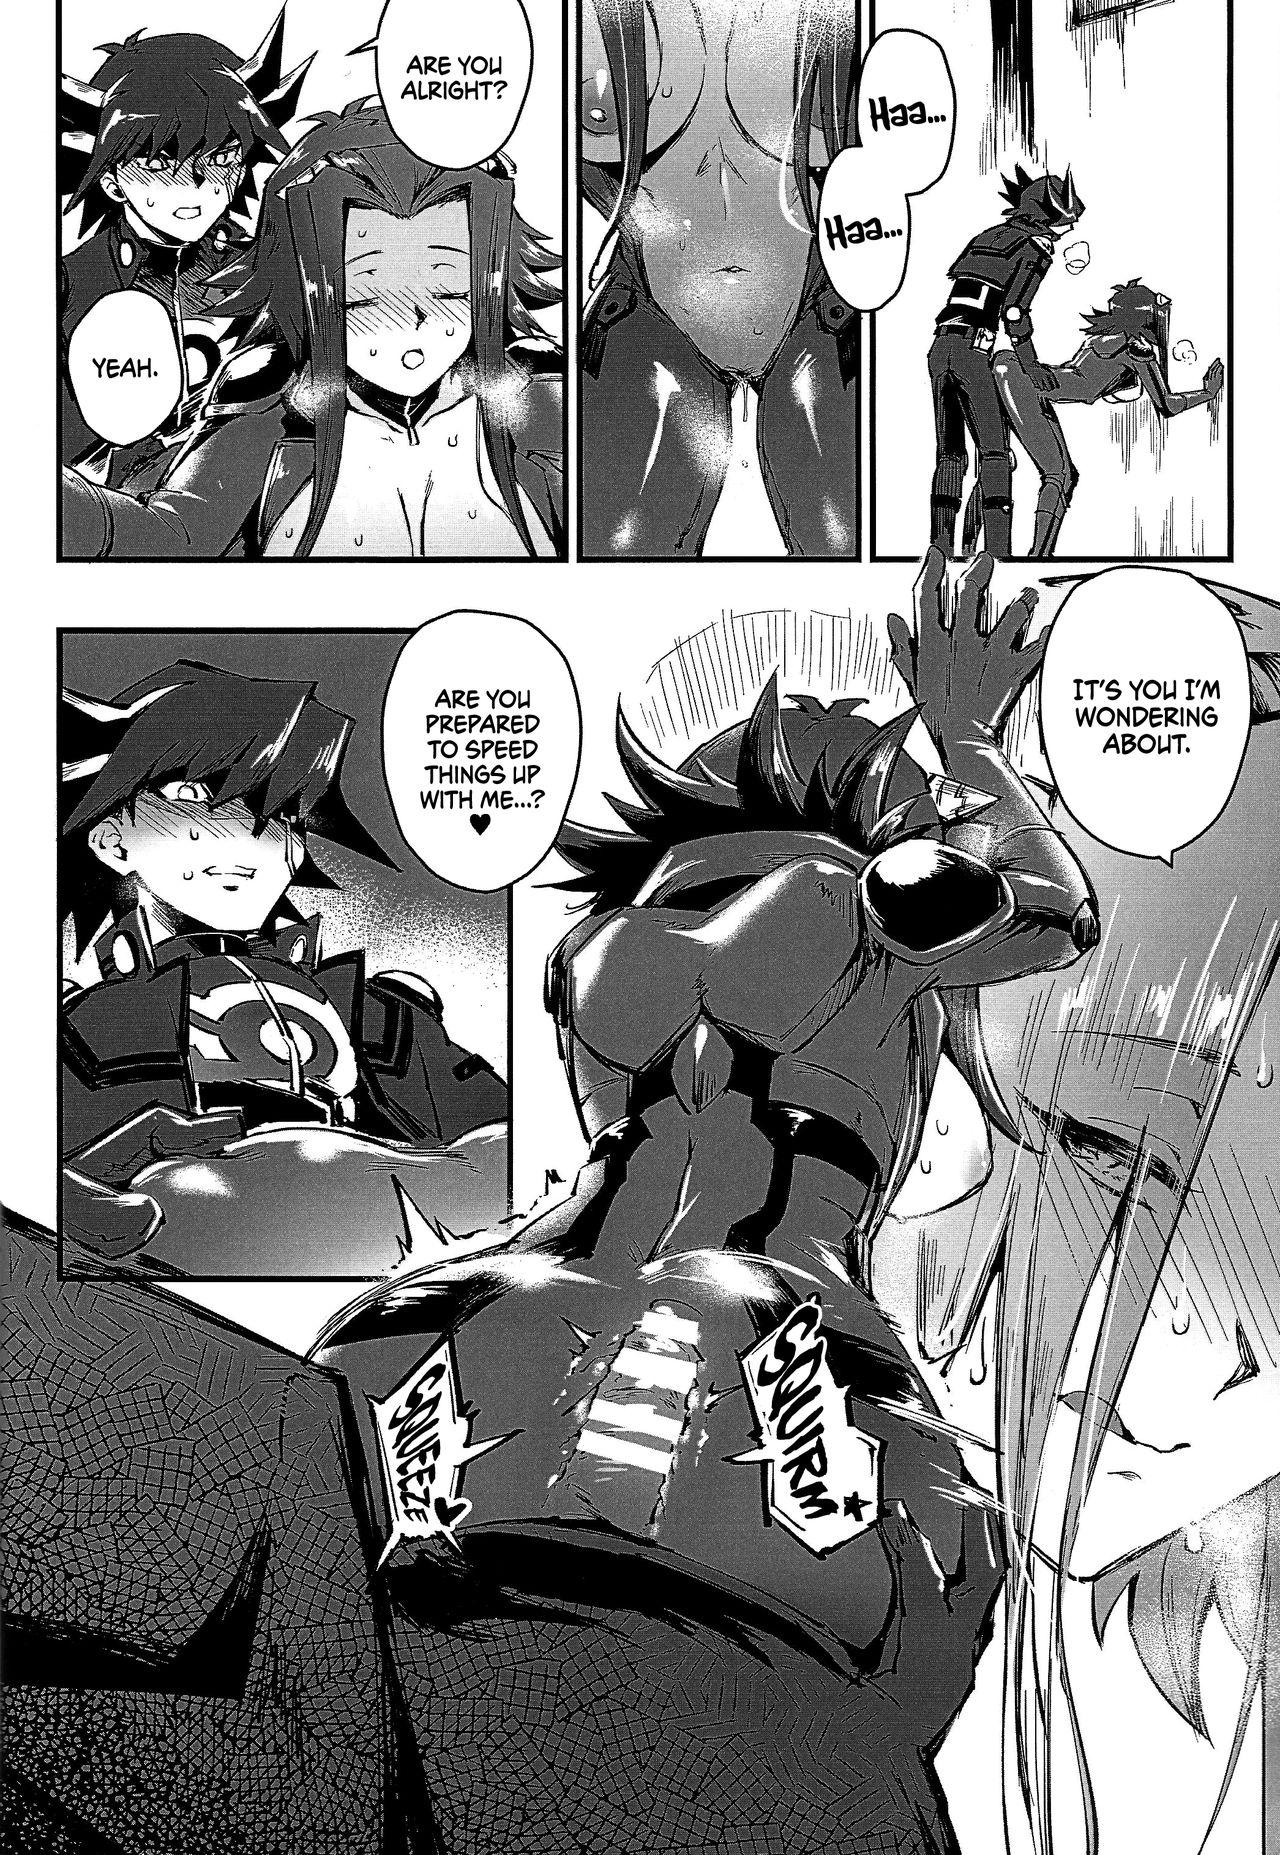 Spit MASK of D. - Yu gi oh 5ds Sexy Whores - Page 9